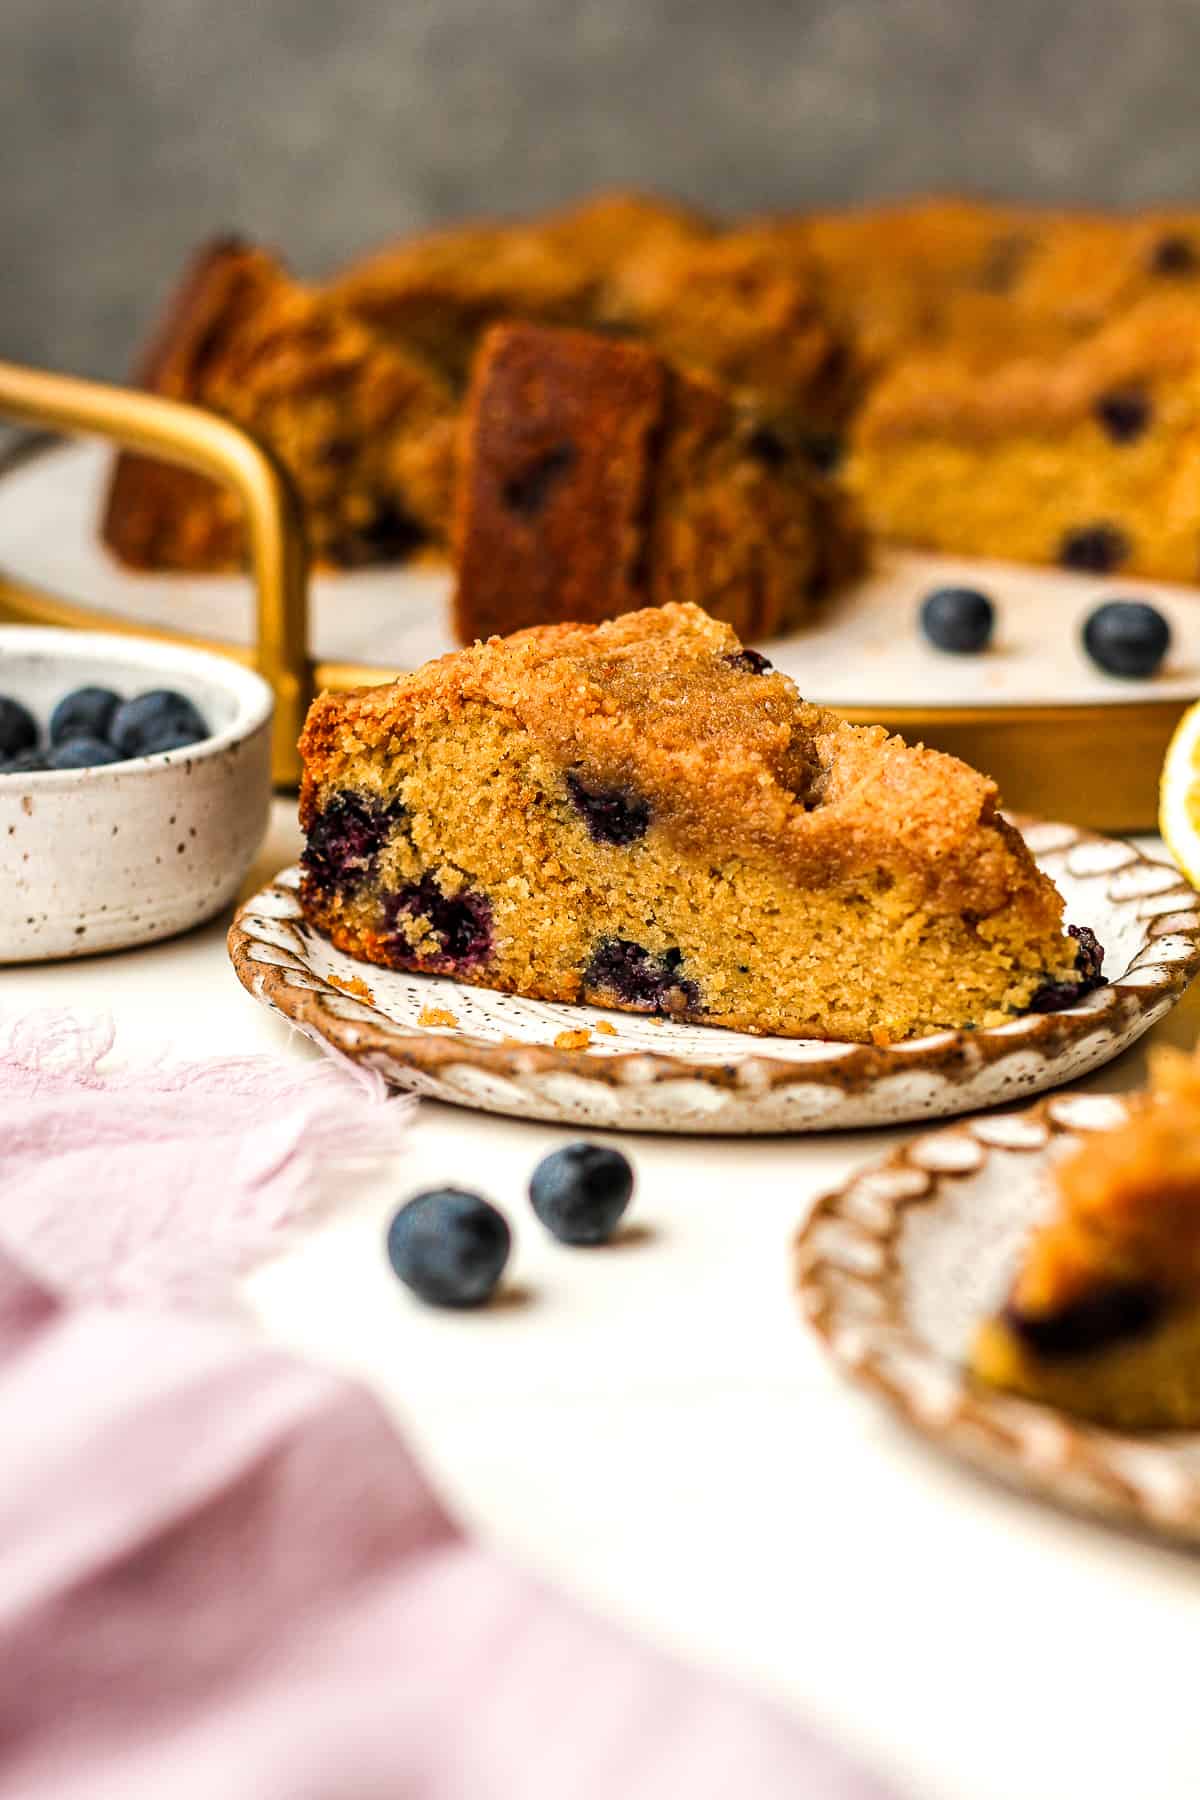 A small plate of a wedge of blueberry lemon coffee cake with the remainder of cake behind it.